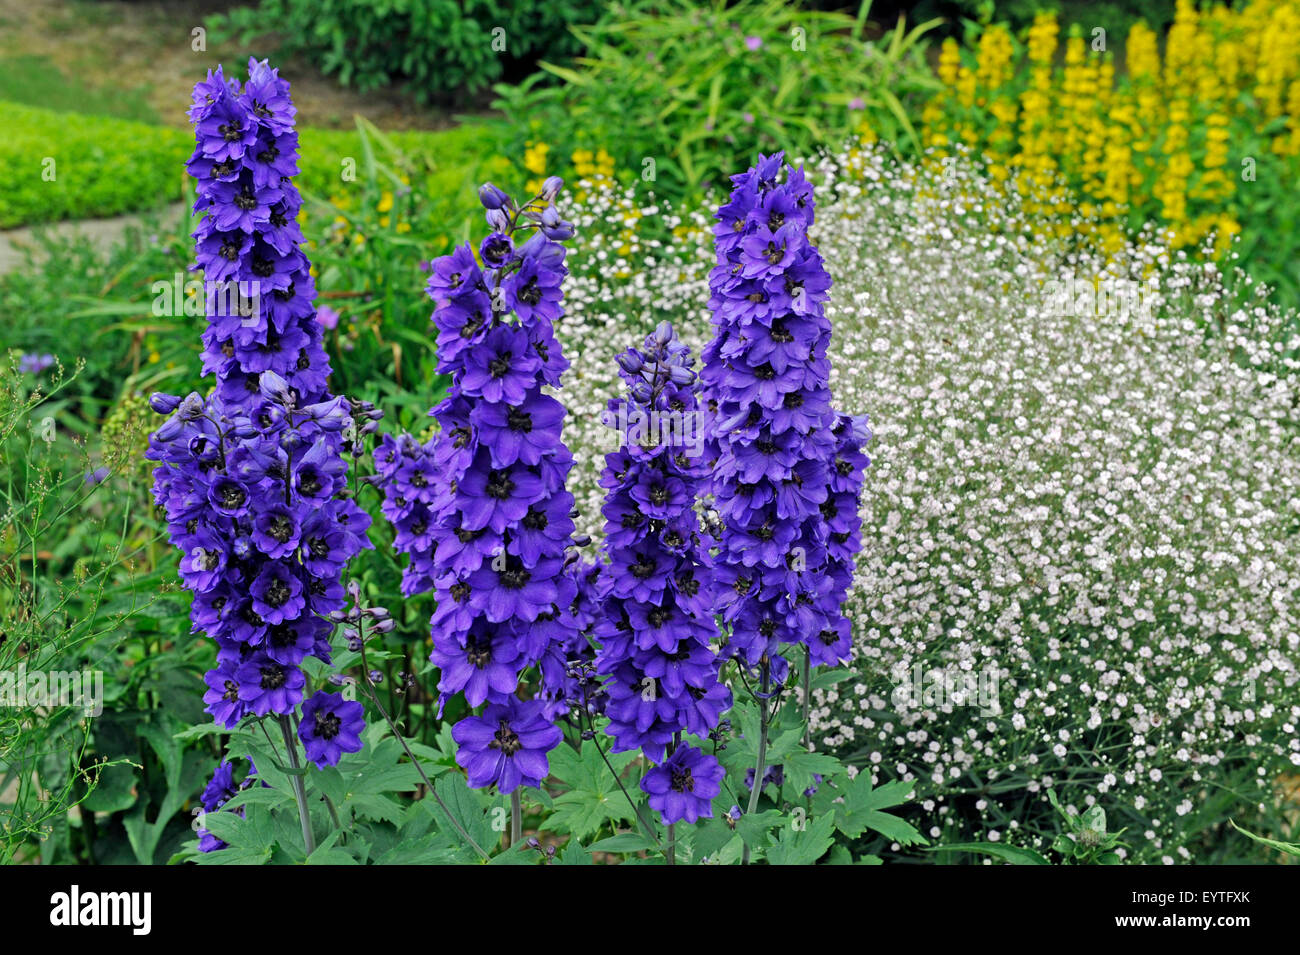 Larkspur 'harlequin', deep-blue Blütenrispen near black eye, period of bloom from June to September, behind it blossoming veil herb and Goldfelberich Stock Photo